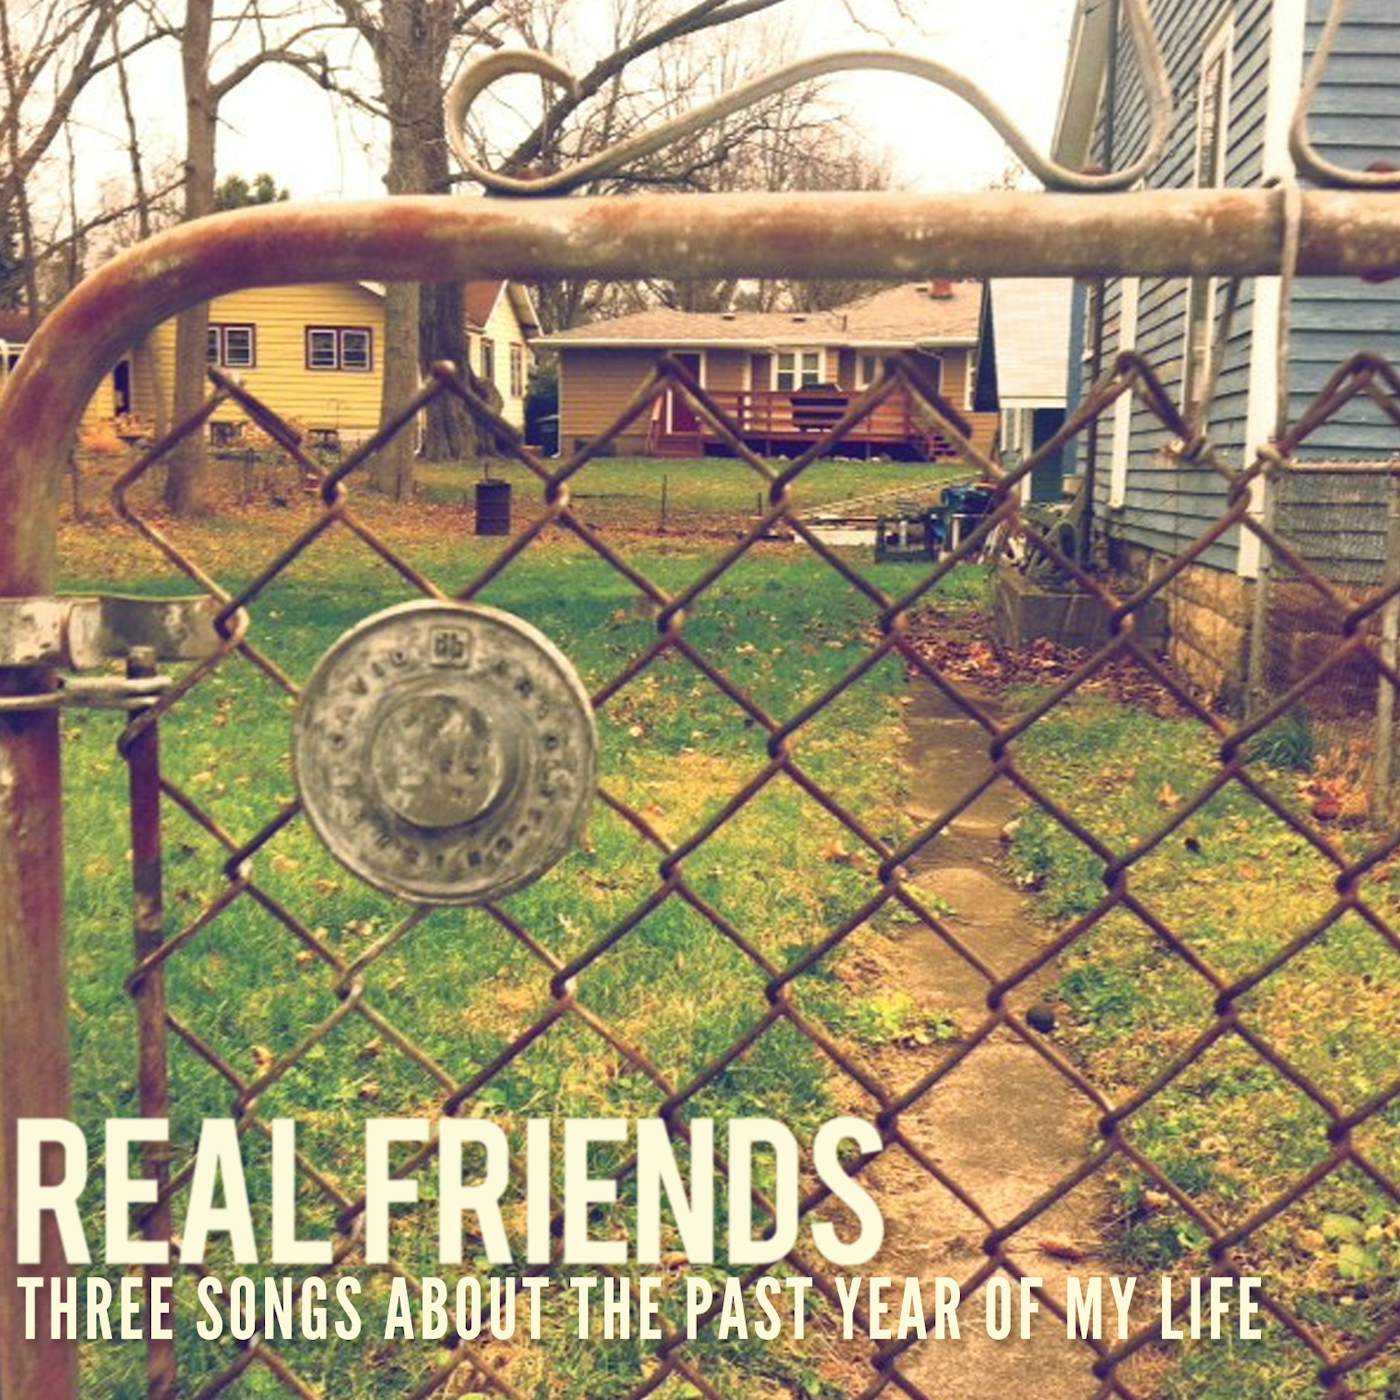 Real Friends Three Songs About The Past Year Of My Life Vinyl Record